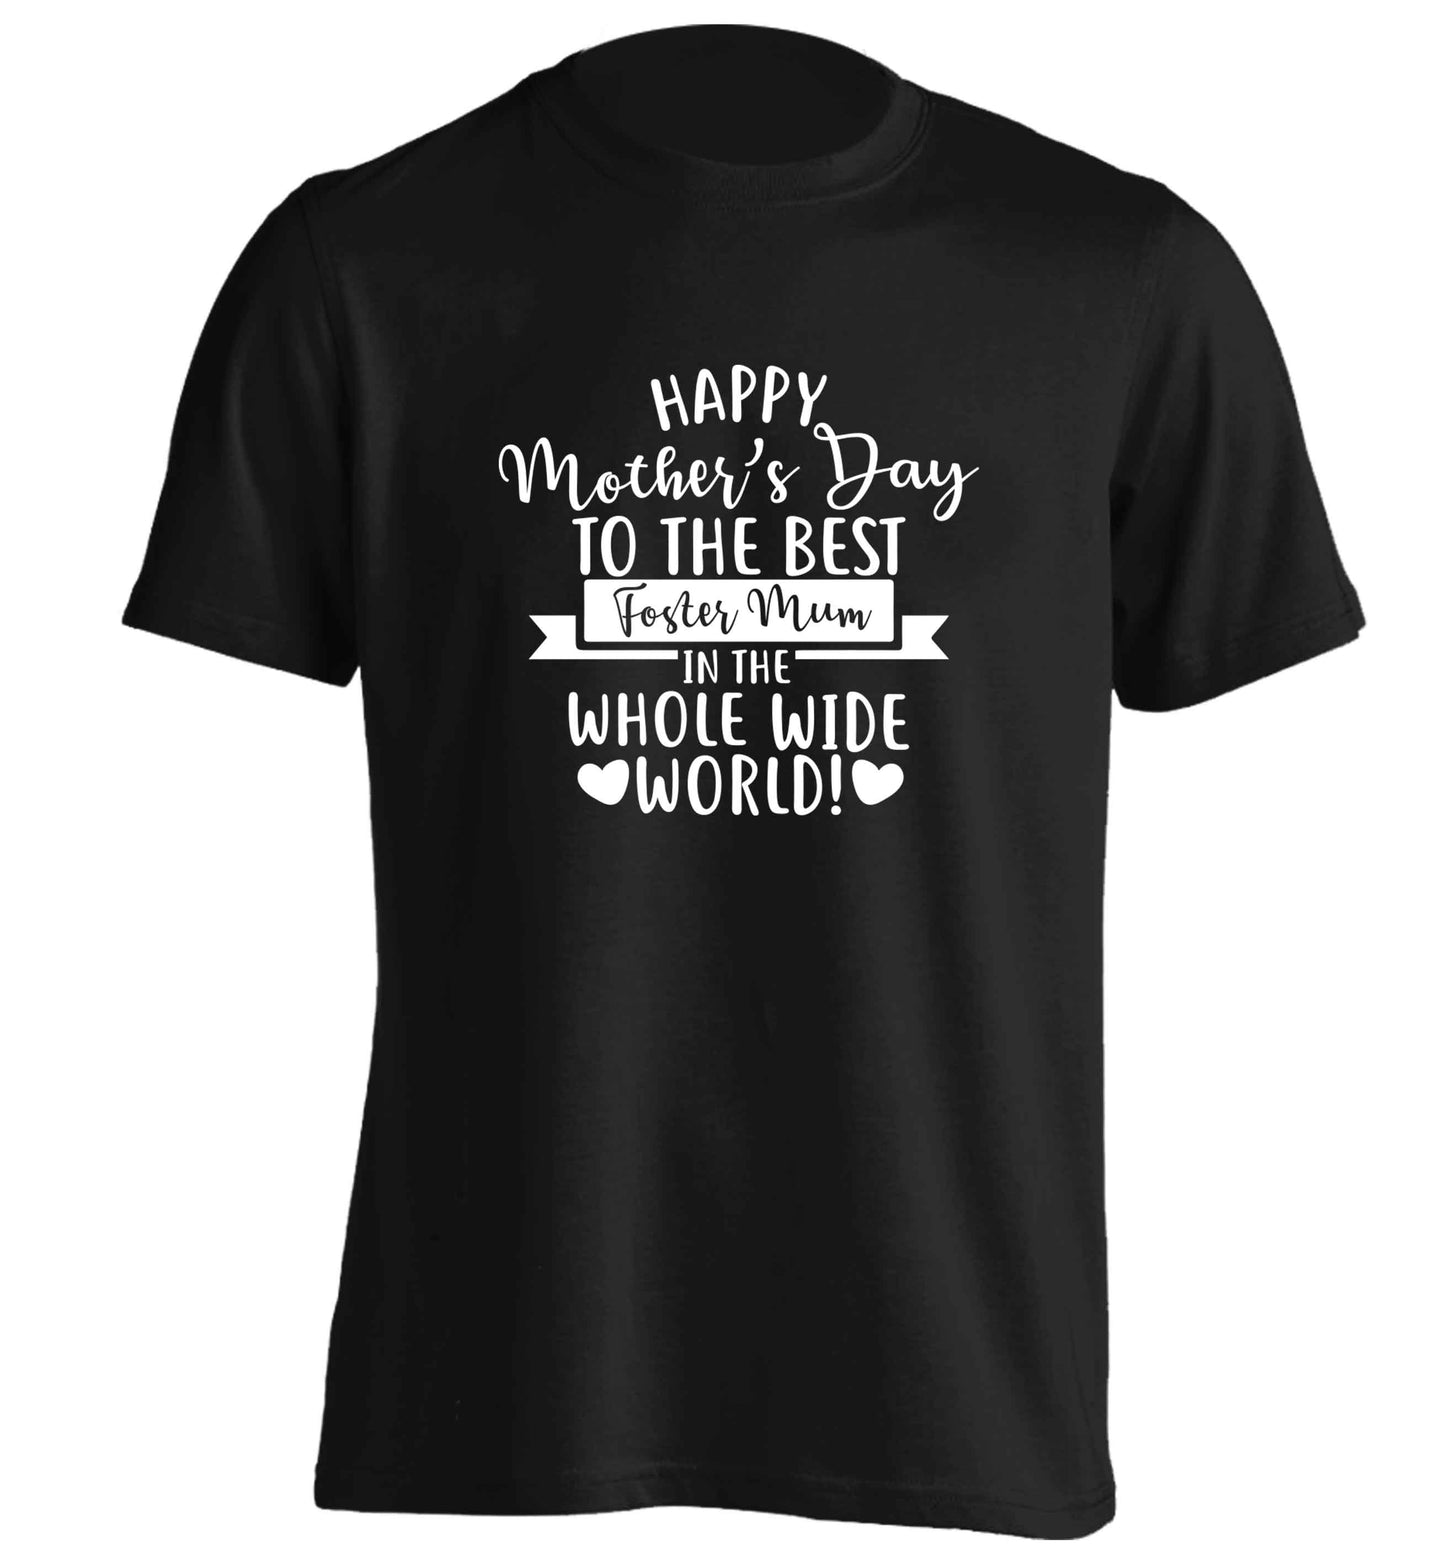 Happy mother's day to the best foster mum in the world adults unisex black Tshirt 2XL